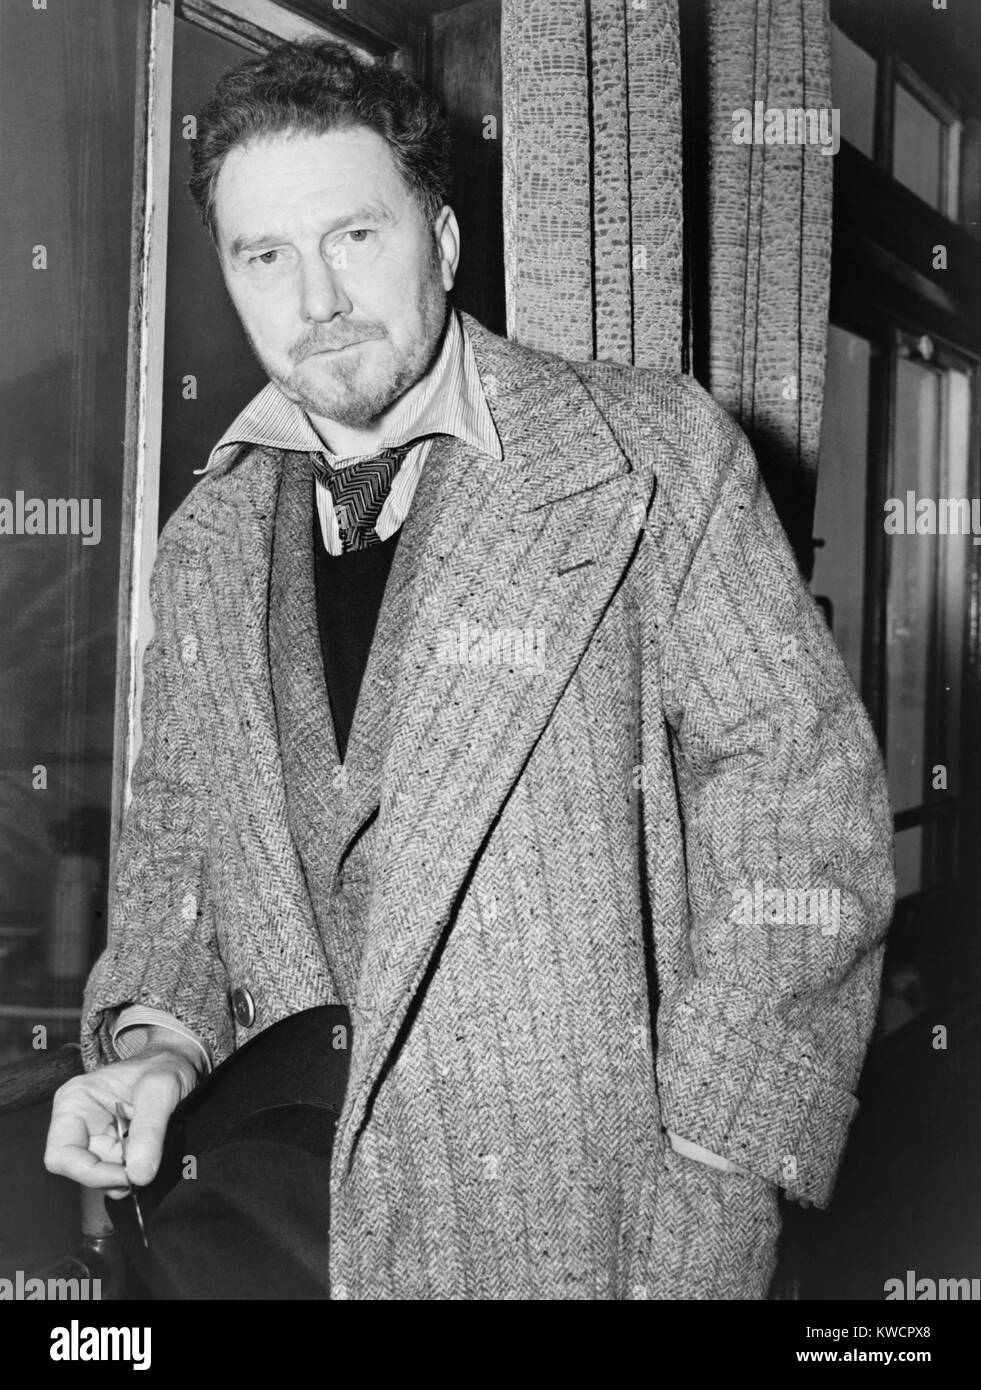 Ezra Pound, American born modernist poet who embraced European fascism in the 1930s. He was indicted in absentia for treason in July 1943 for anti American broadcasts he made from Italy during WW2. - (BSLOC_2015_1_34) Stock Photo